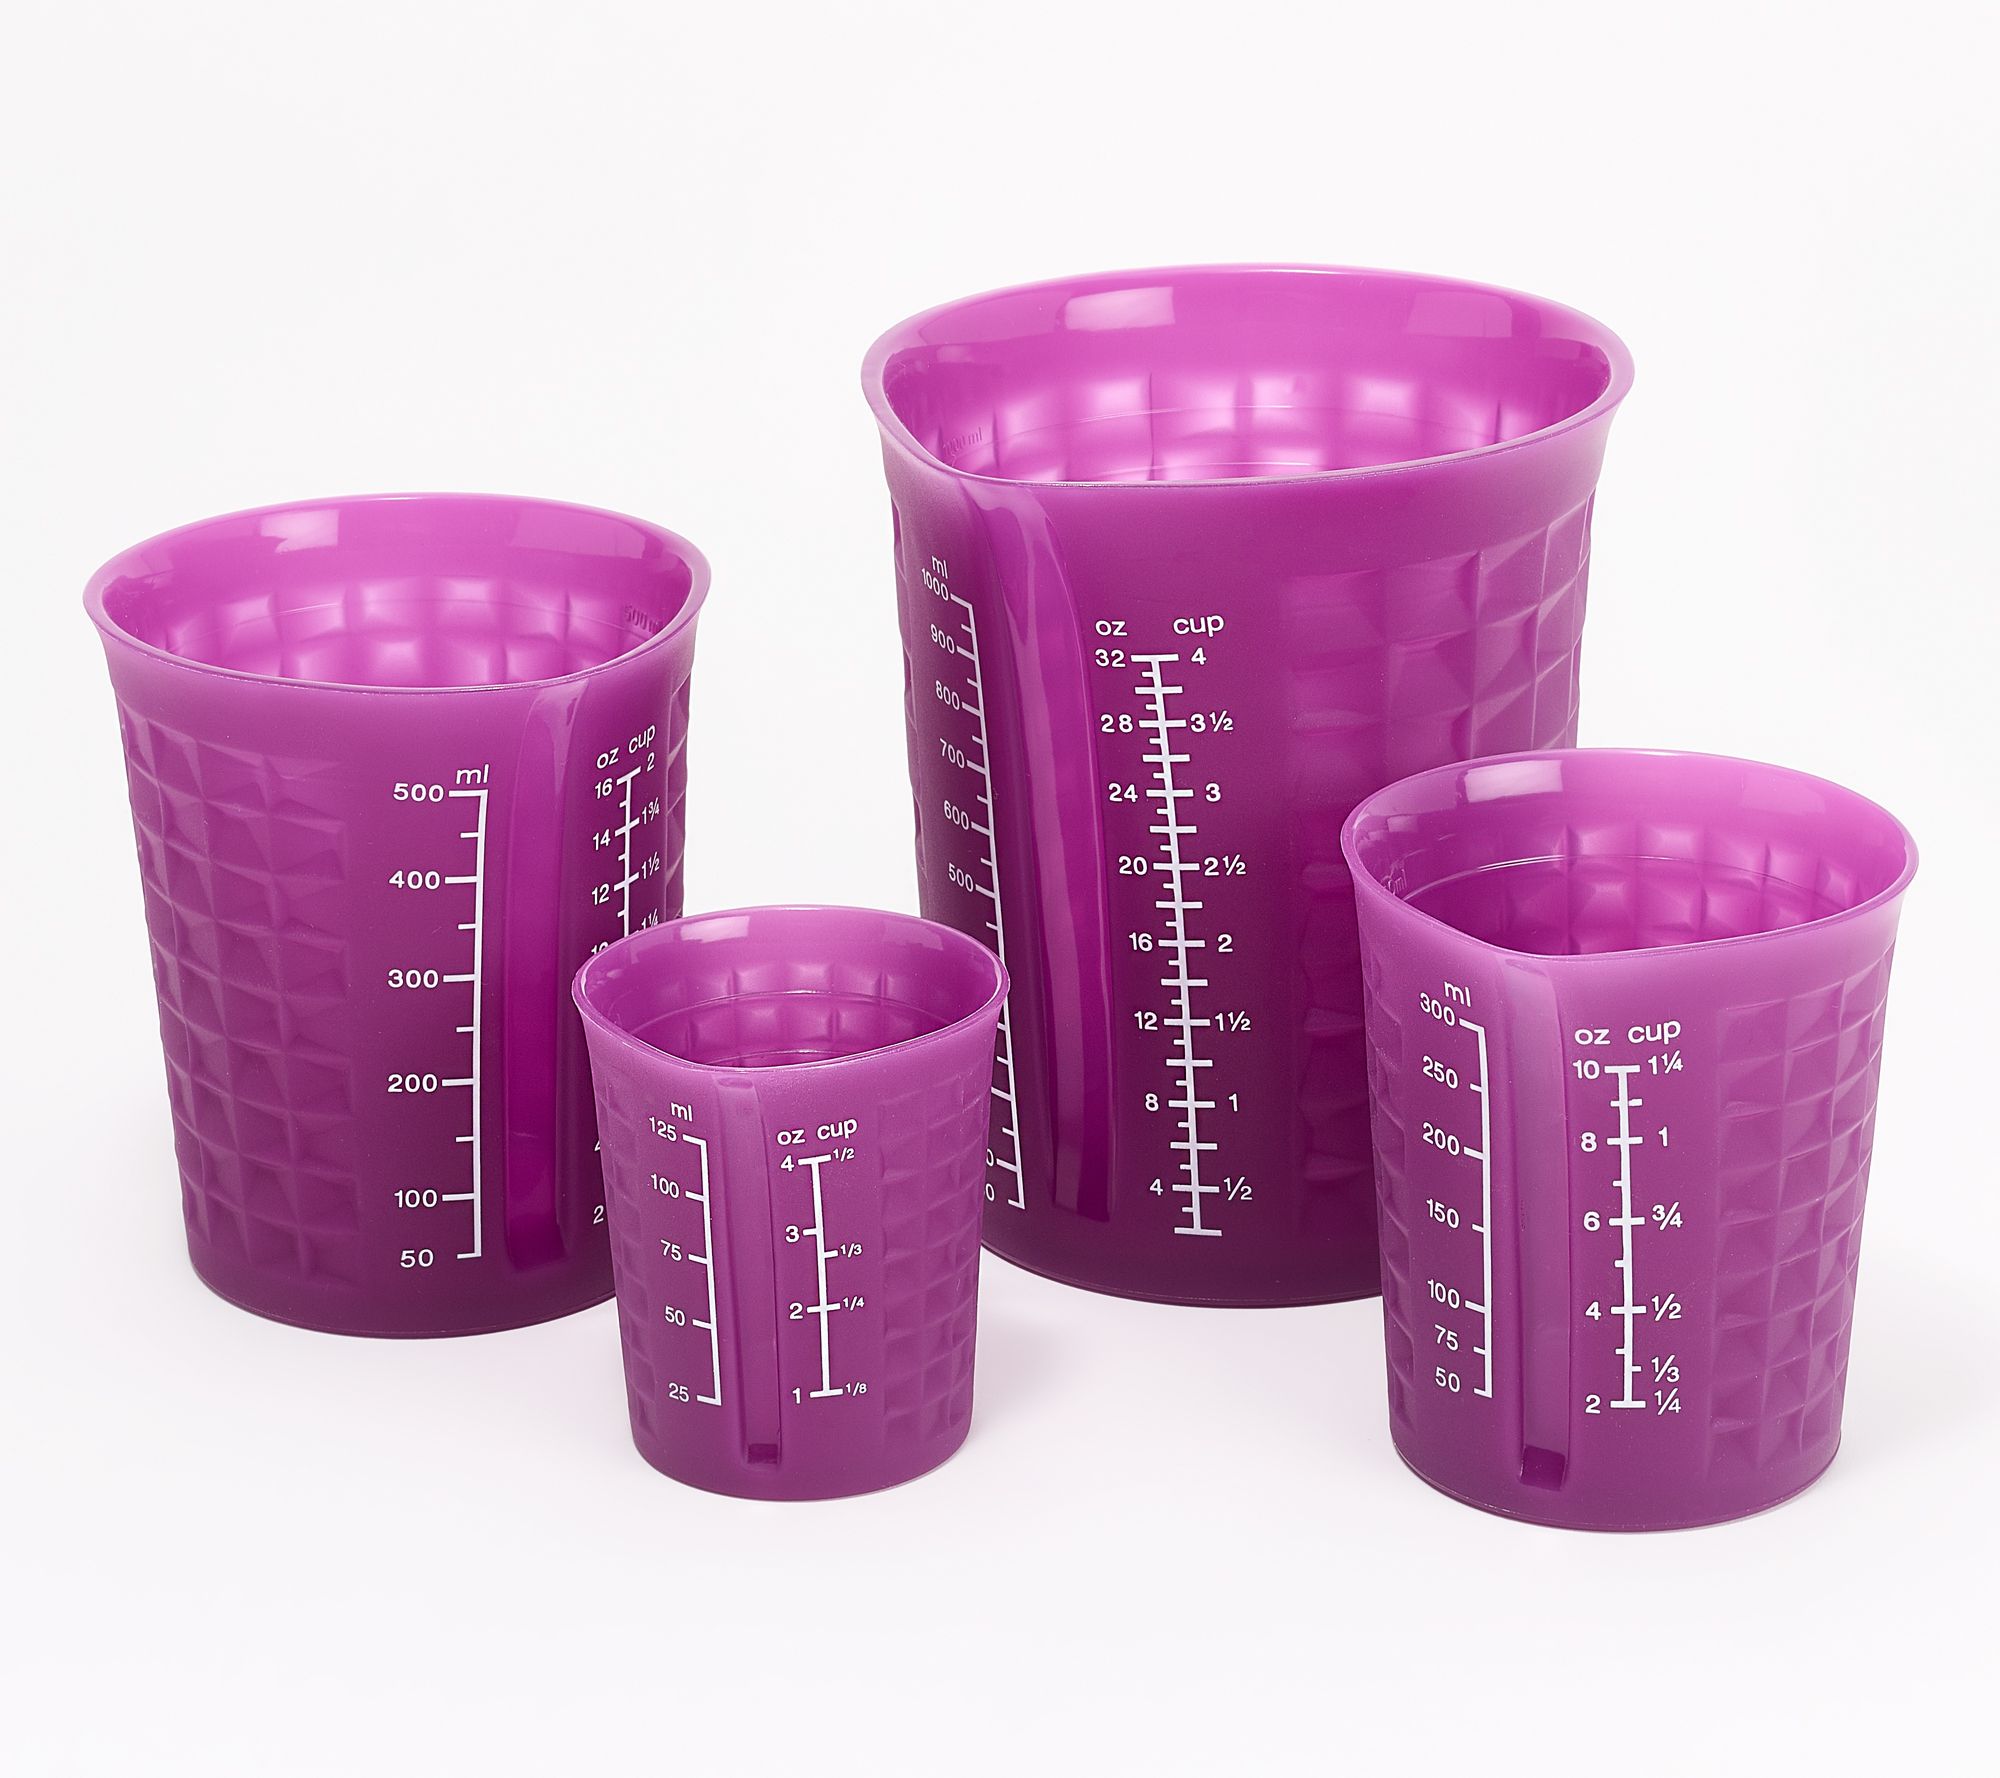 NEW Tupperware Measuring Cups Set of 6 PINK Curved Embossed Handle